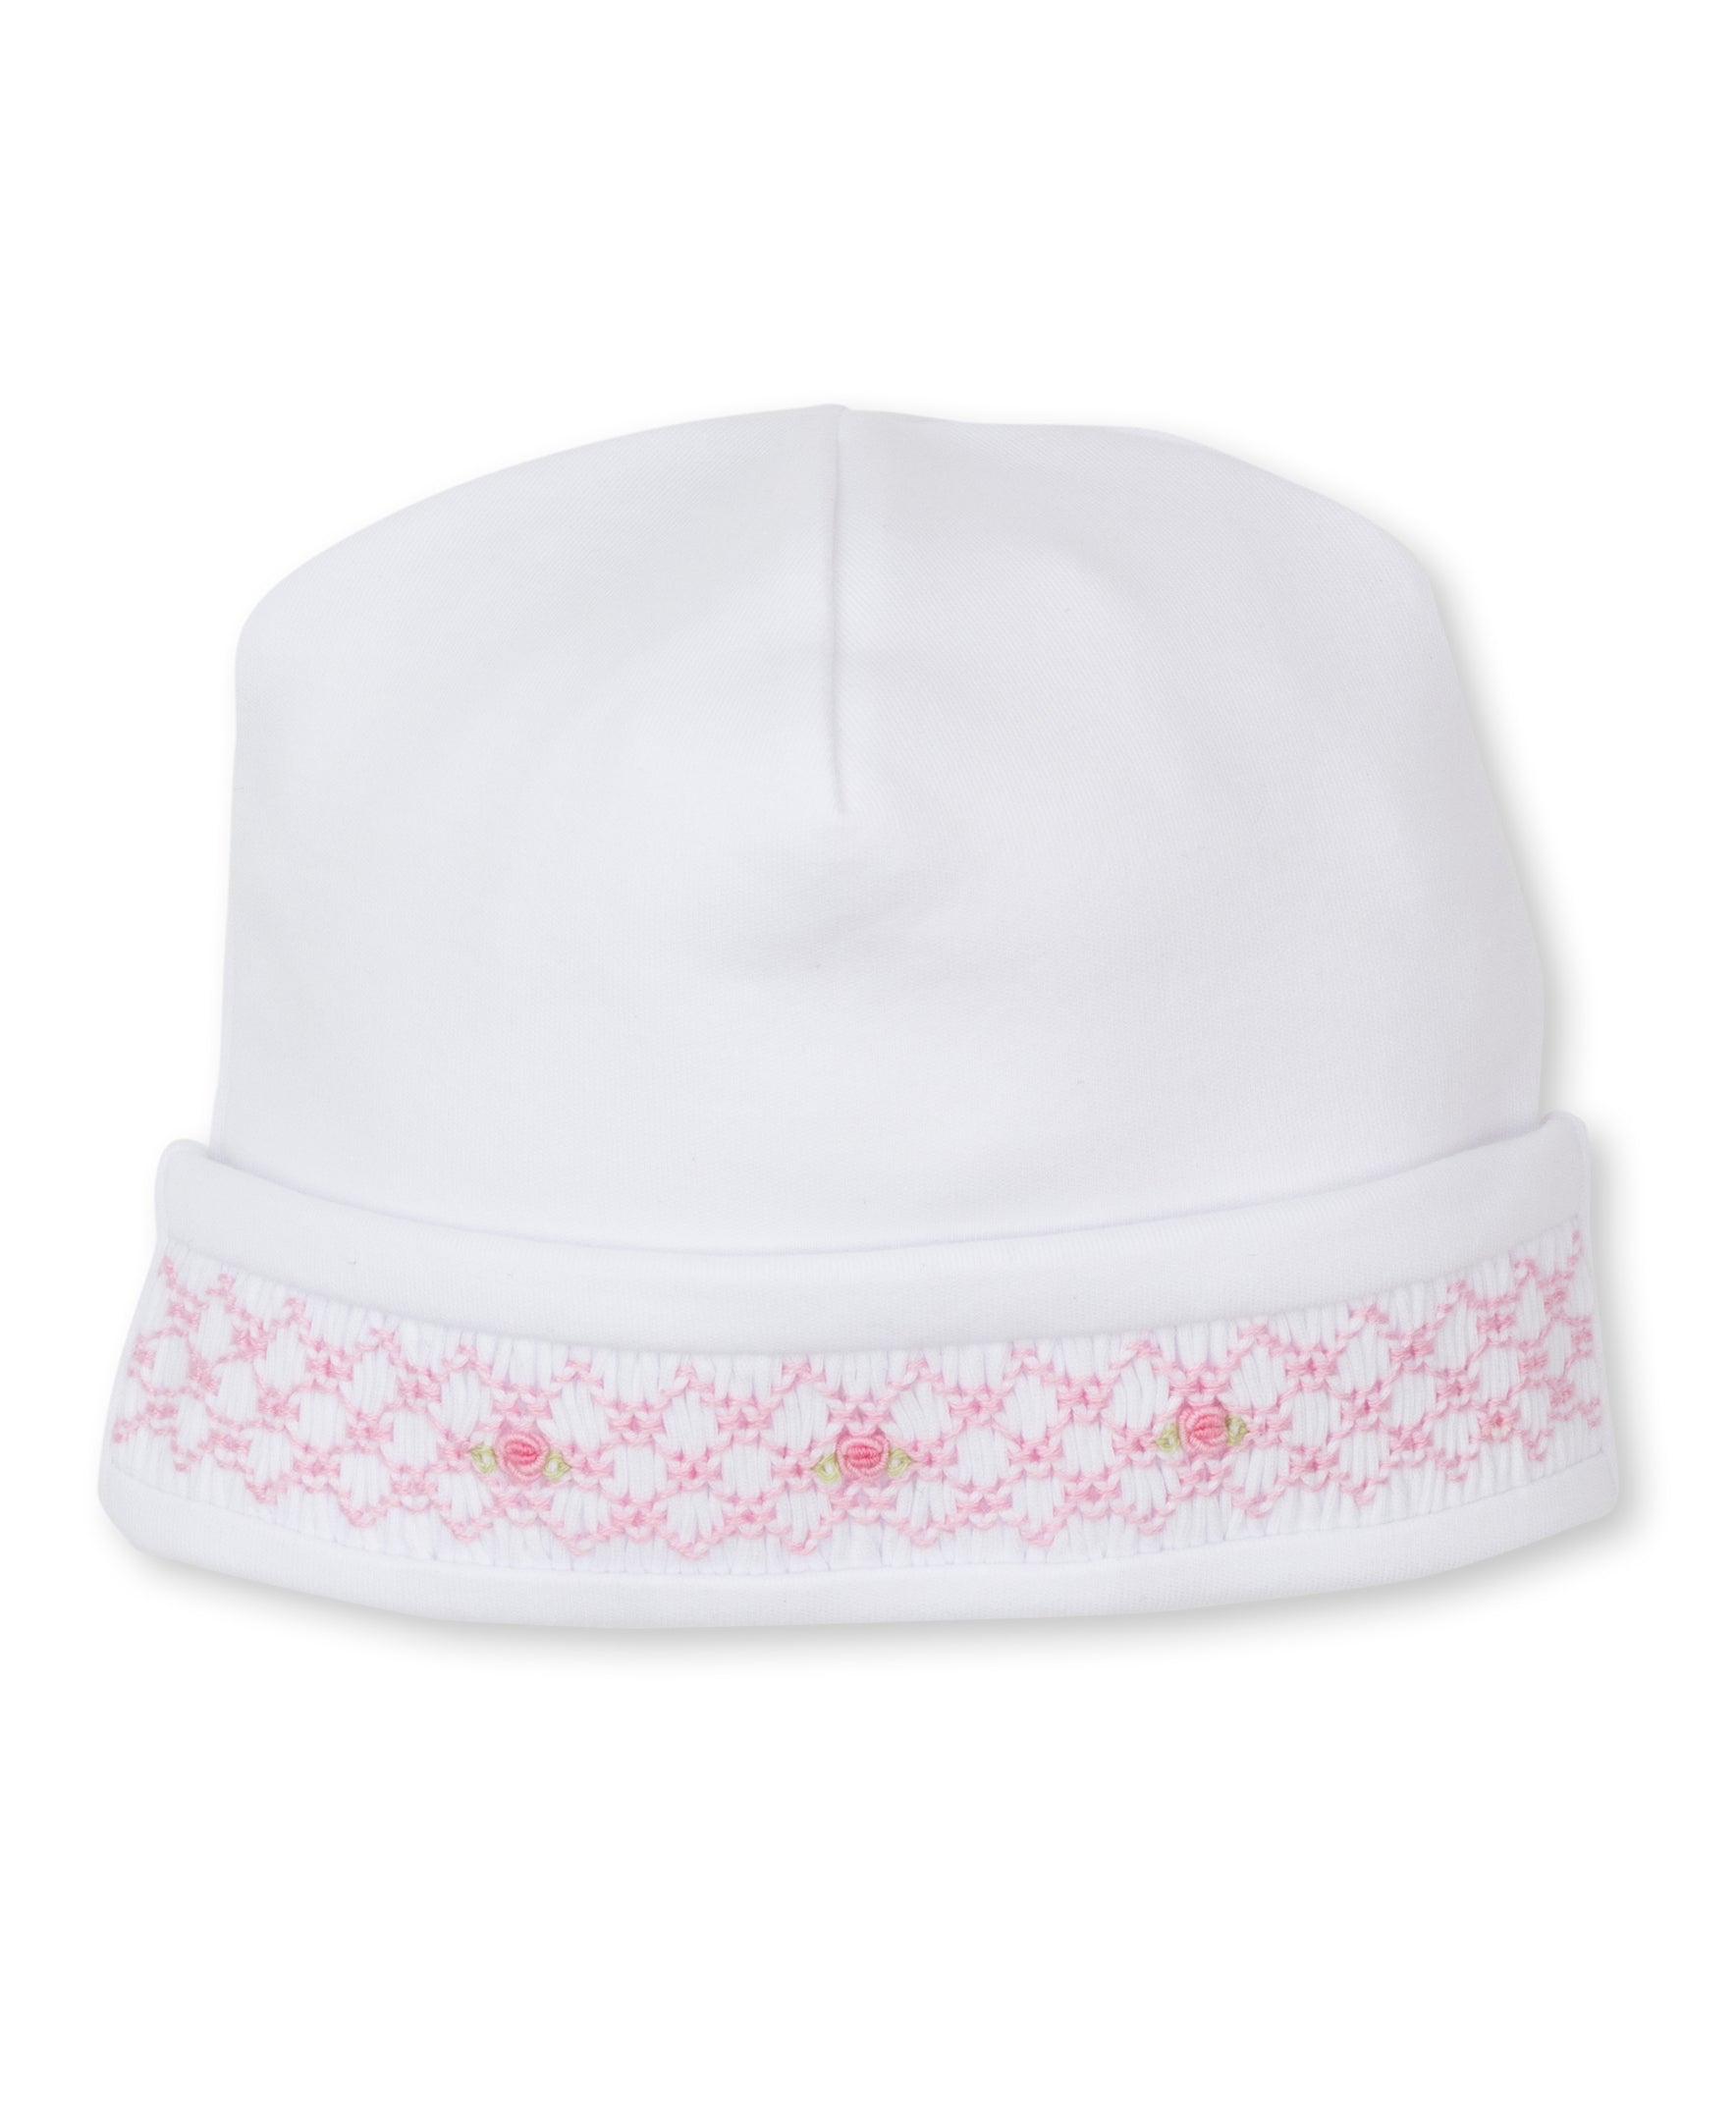 CLB Fall 23 White/Pink Hand Smocked Hat - Kissy Kissy